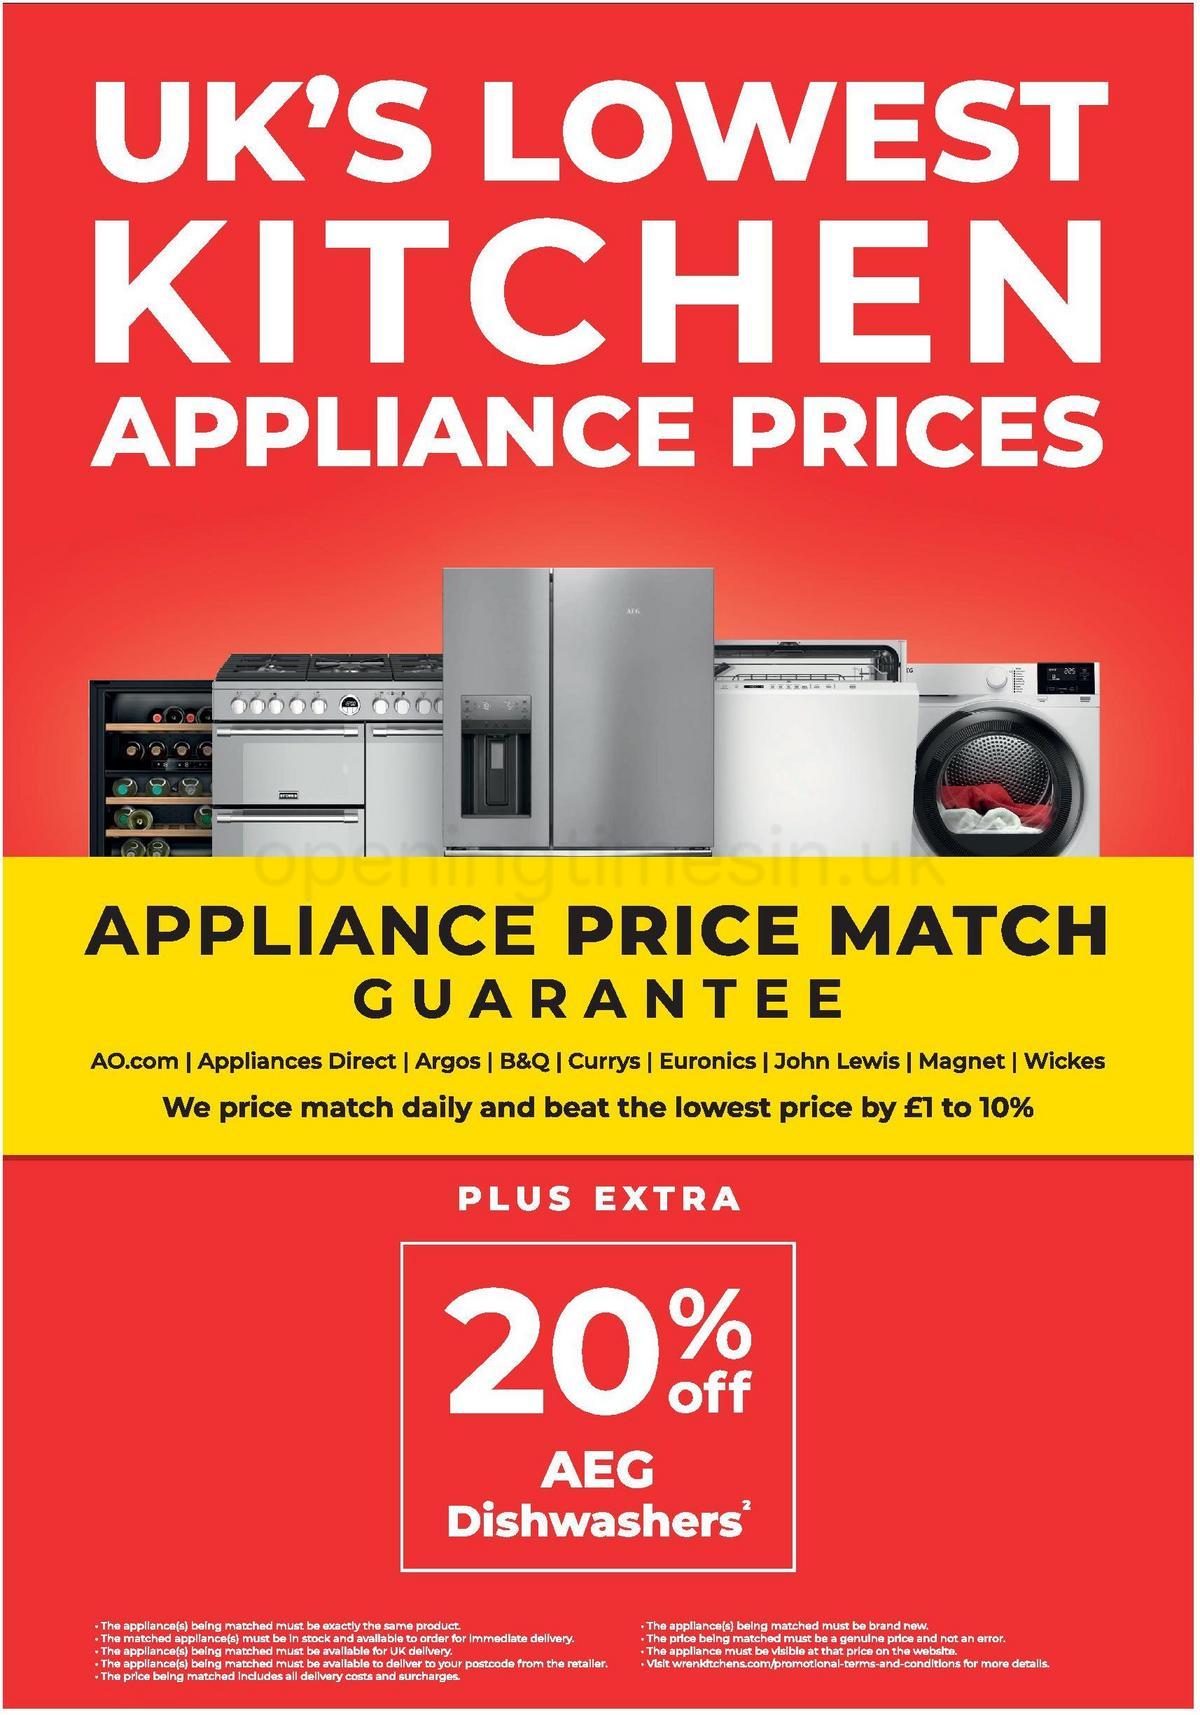 Wren Kitchens Offers from 30 March